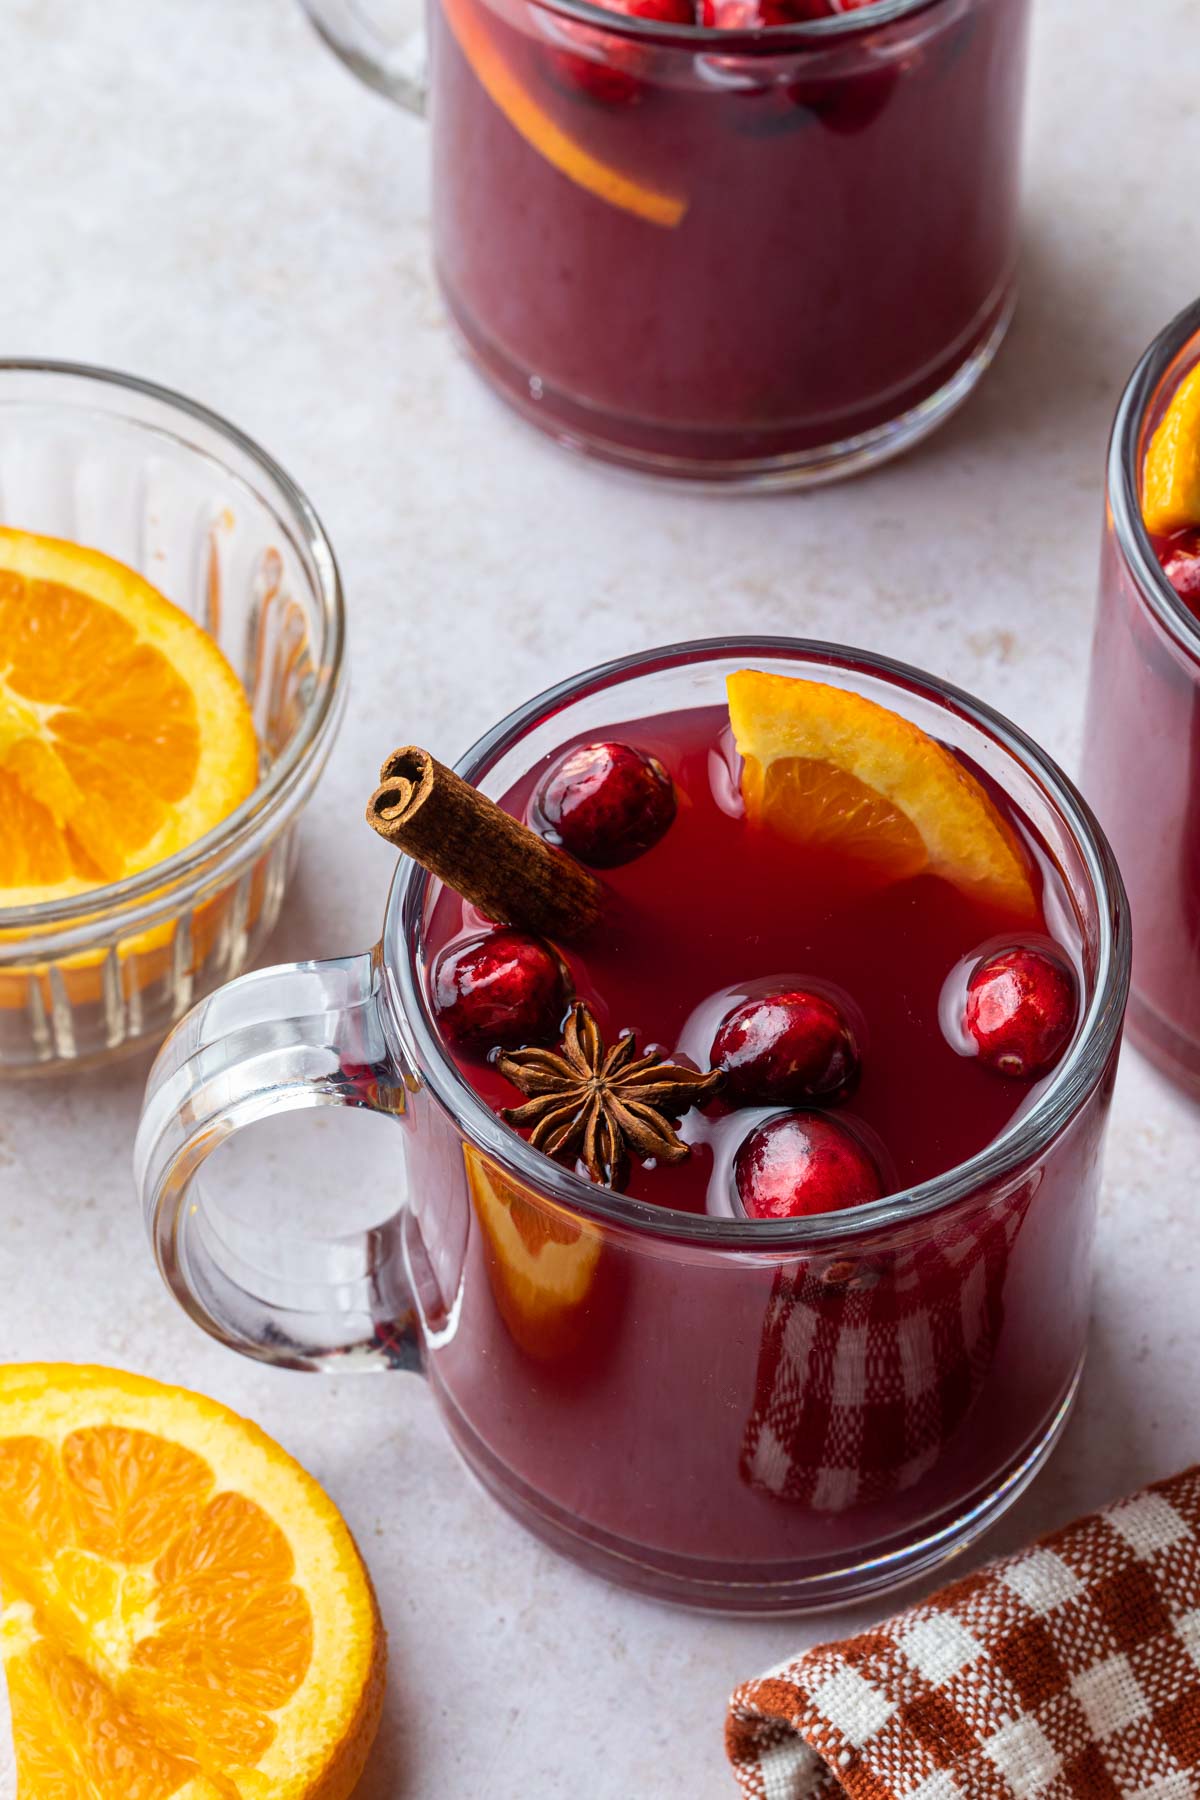 A glass mug of non alcoholic mulled wine garnished with orange slice, fresh cranberries, star anise and a cinnamon stick.